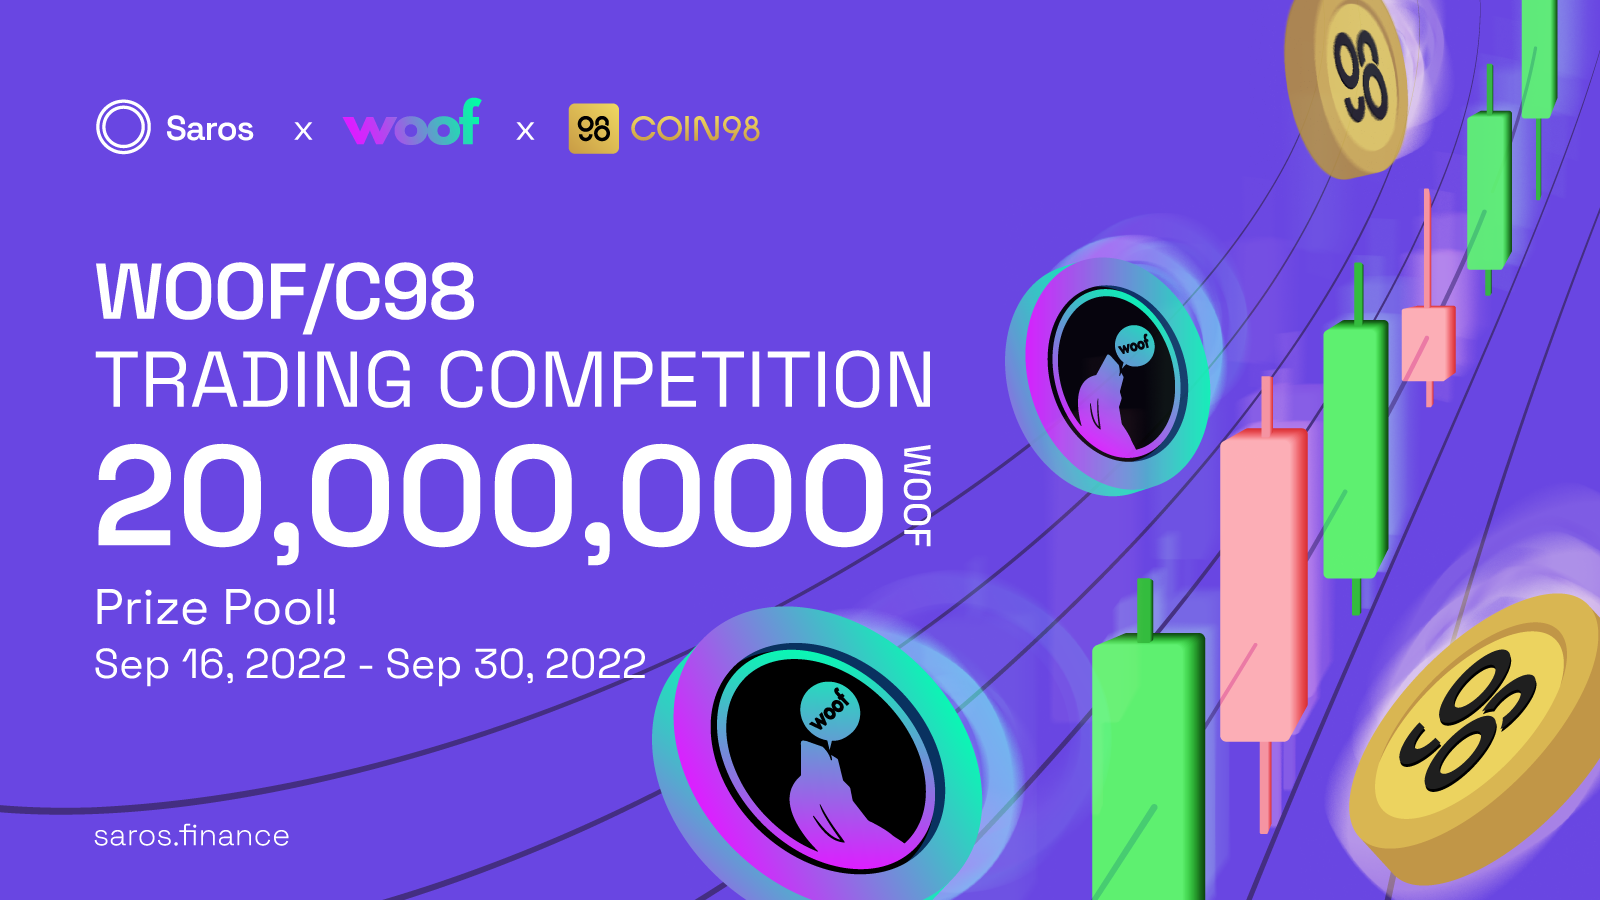 WOOF x C98 Trading Competition - 20,000,000 WOOF Prize Pool!